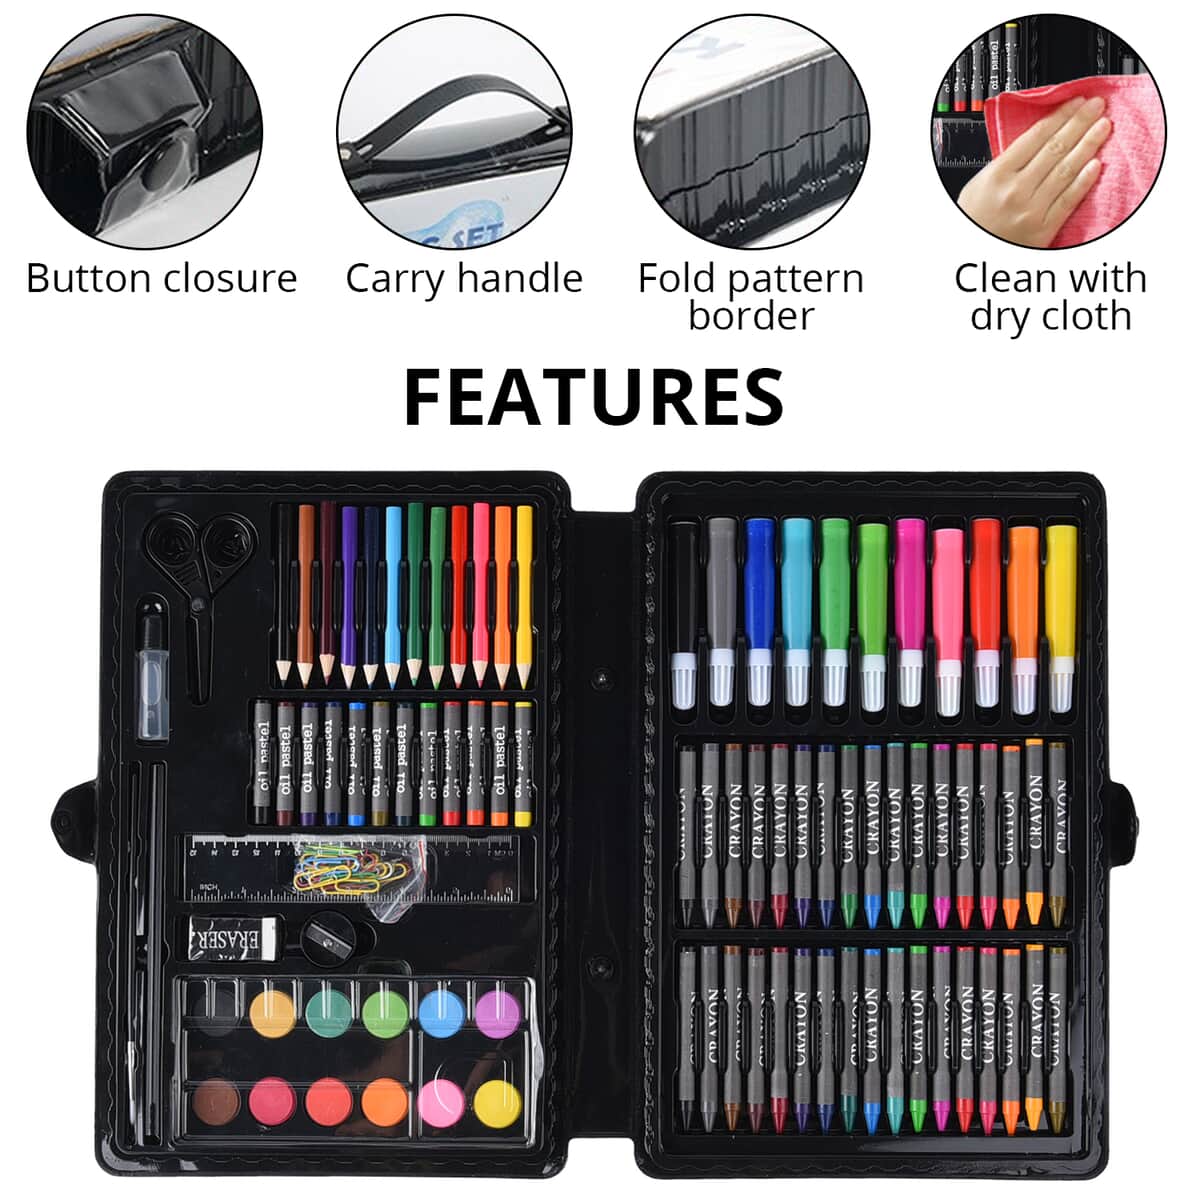 109 Piece Deluxe Art Supply Set (Coloring Pencils, Crayons, Oil Pastels, Markers, Water Paint, Eraser, Pencil, Sharpener, Liquid Glue and White Glue) image number 2